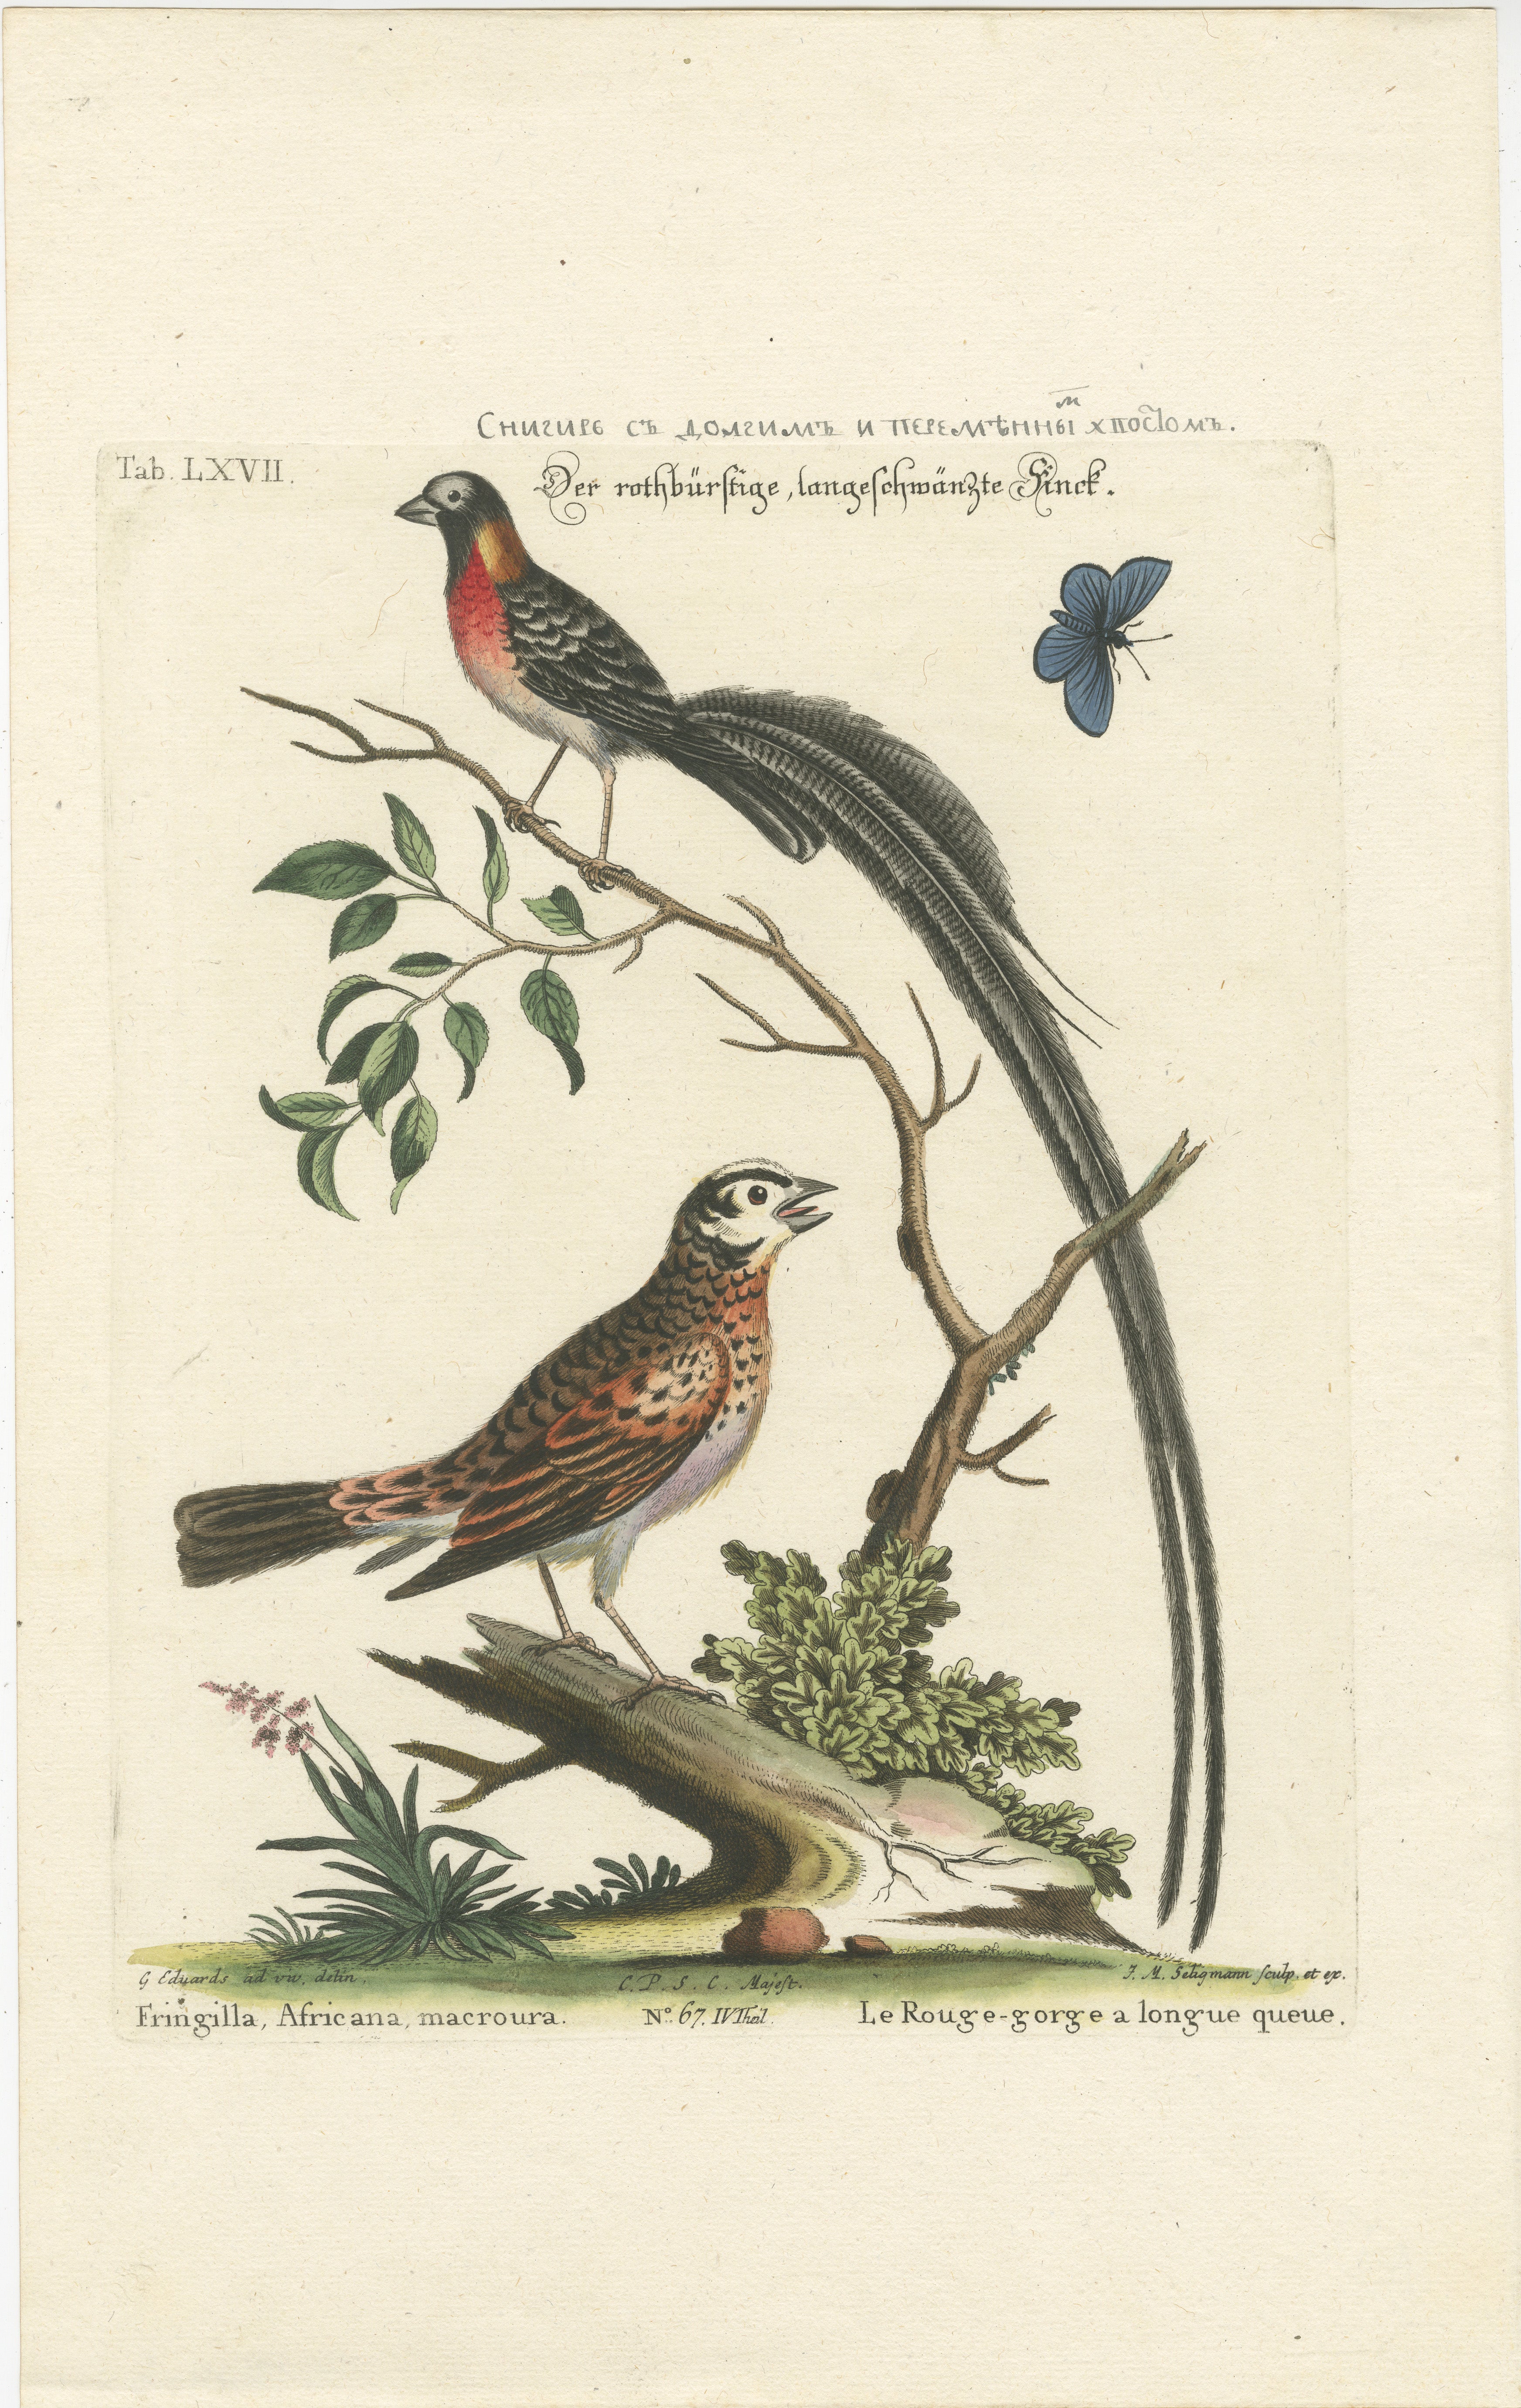 This hand-colored engraving, part of Johann Michael Seligmann's collection, is a precise and vibrant representation of wildlife, based on the works of George Edwards. It showcases an African finch with a notably long tail, and its poised elegance is